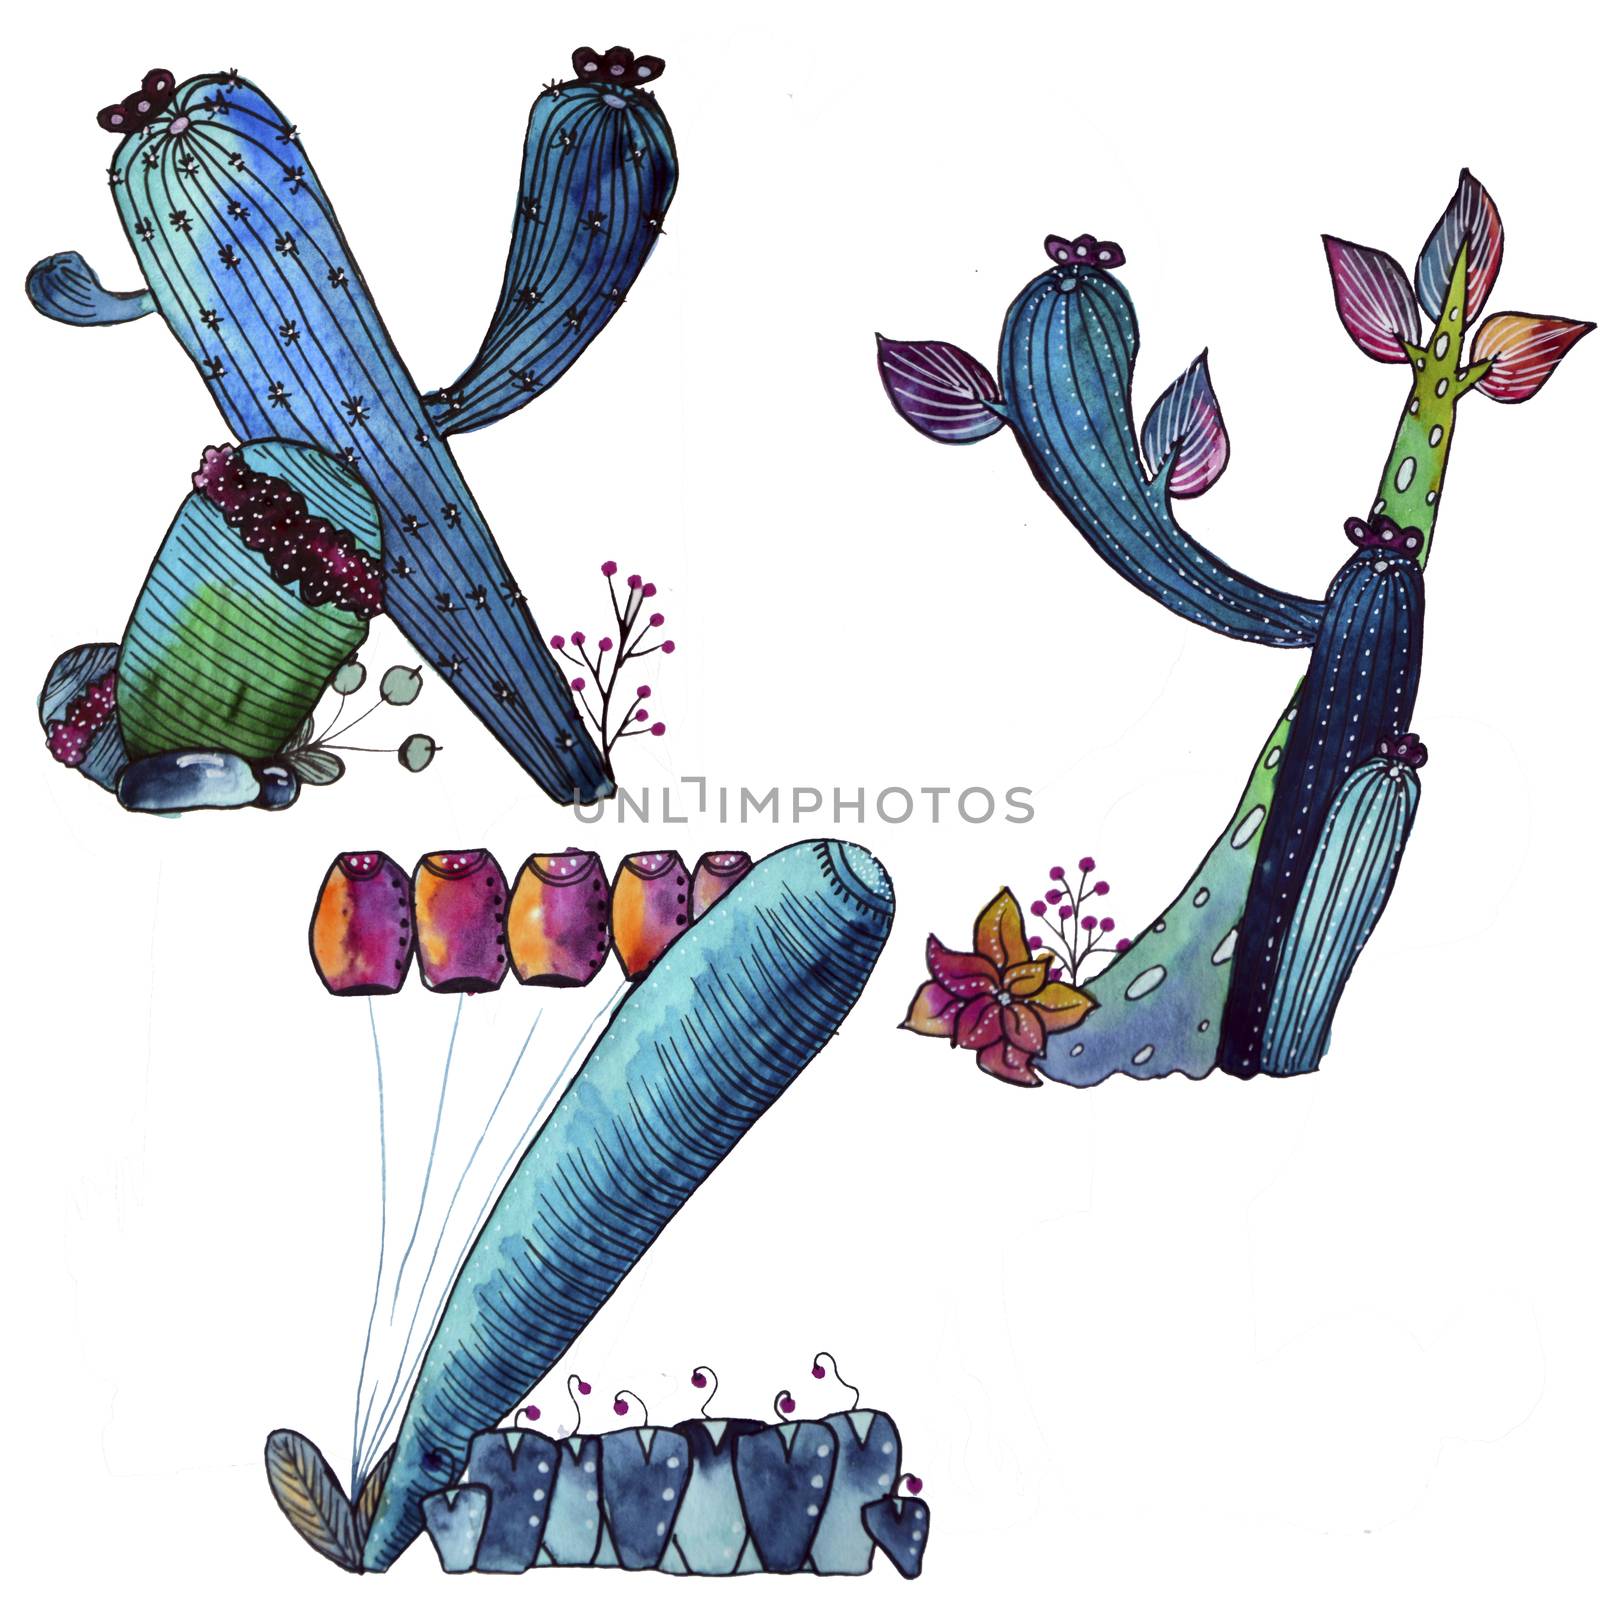 X, Y, Z letter in the form of cactus in blue colors, green eco English letter Illustration on a white background, watercolor illustration